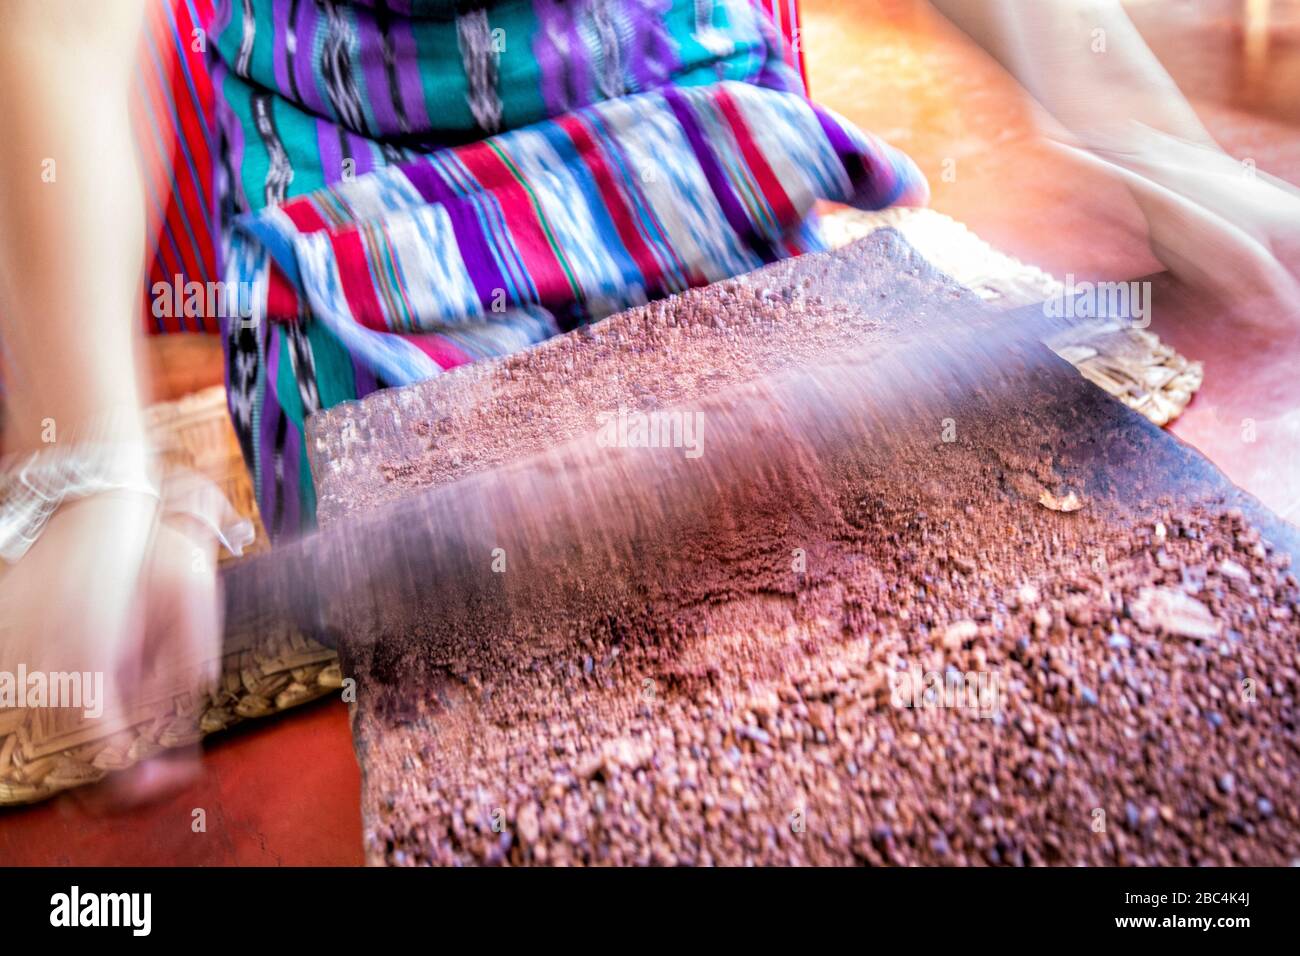 A young woman hand presses cacao beans into chocolate paste in the village of San Juan on the shore of Lake Atitlan, Guatemala. Stock Photo